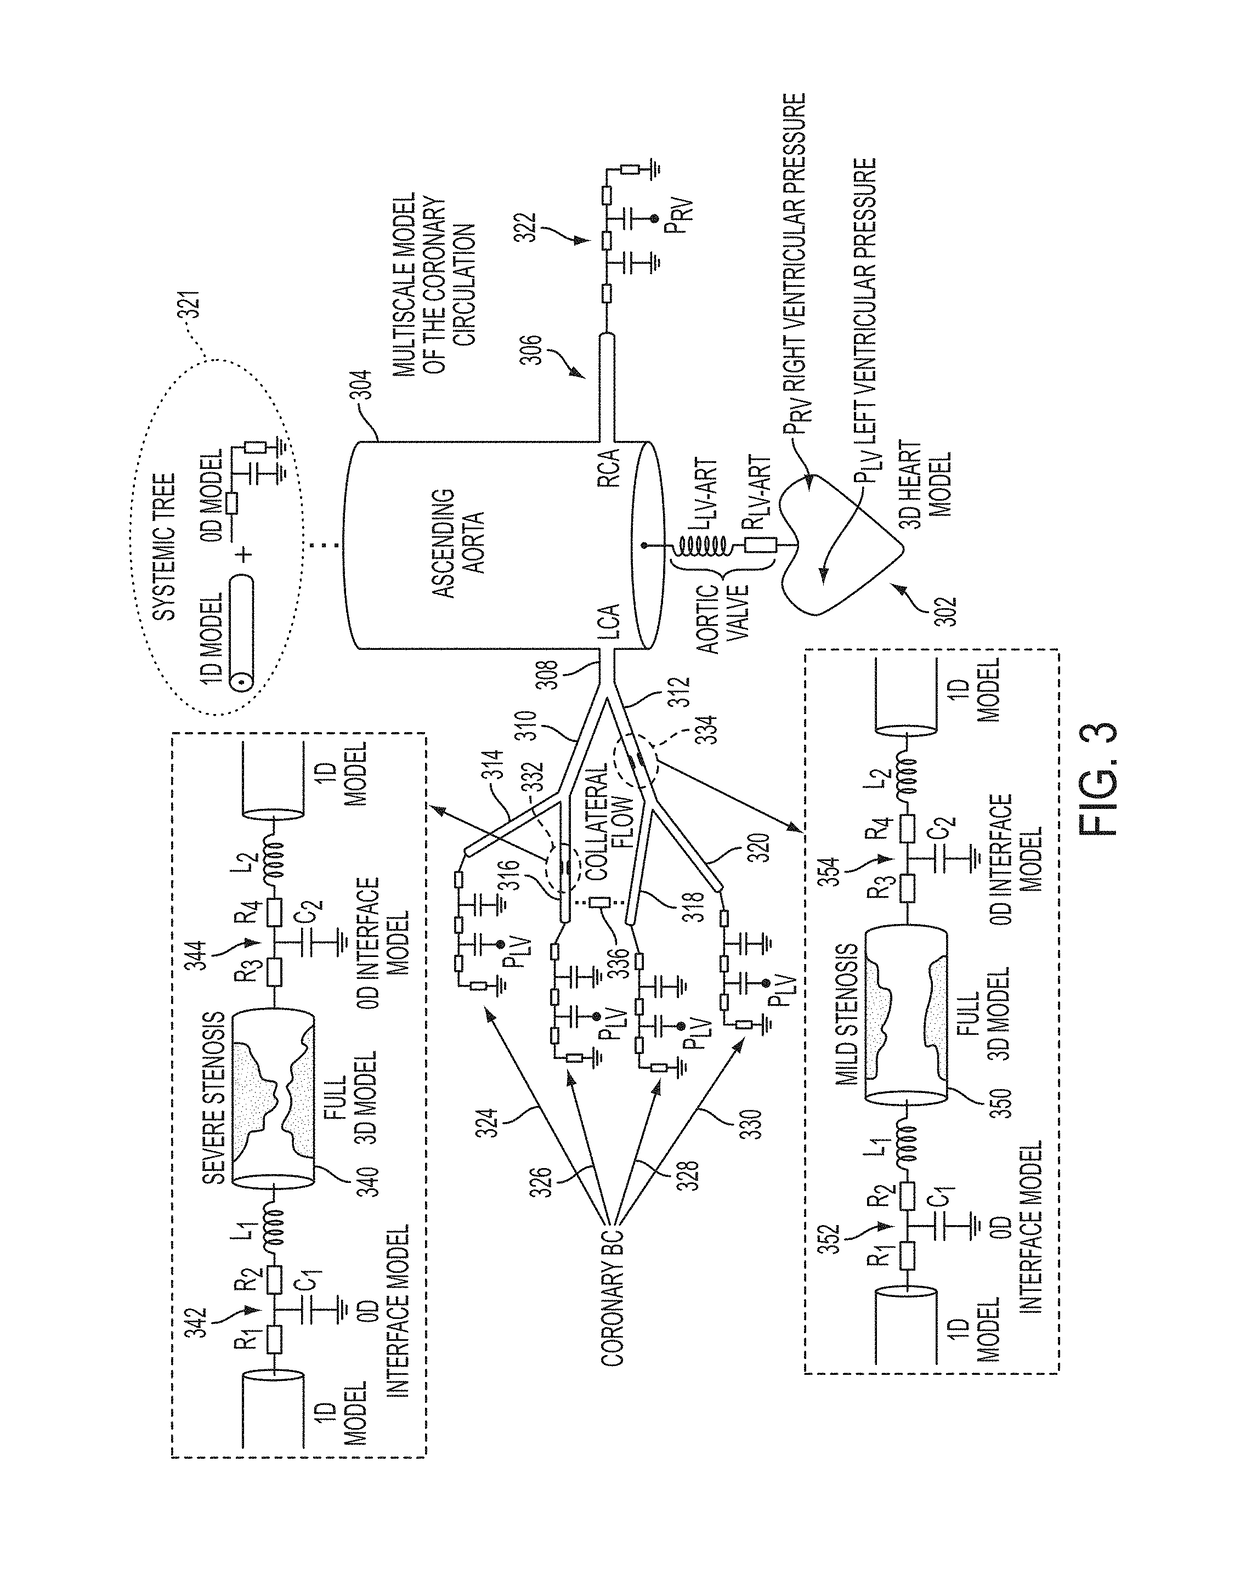 Method and system for multi-scale anatomical and functional modeling of coronary circulation